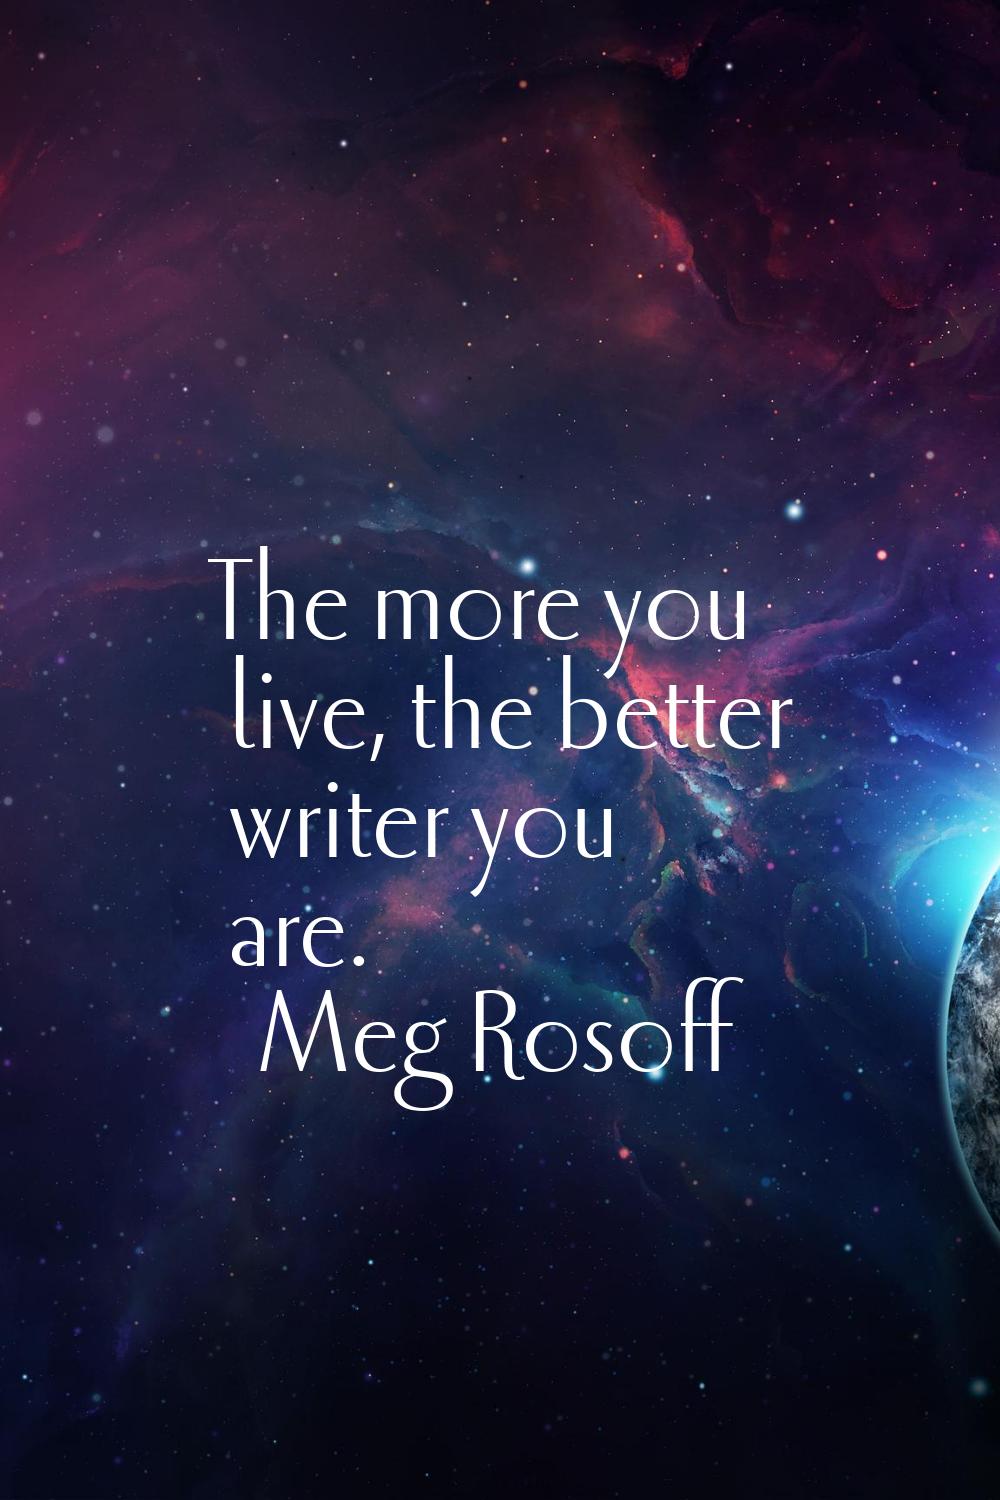 The more you live, the better writer you are.